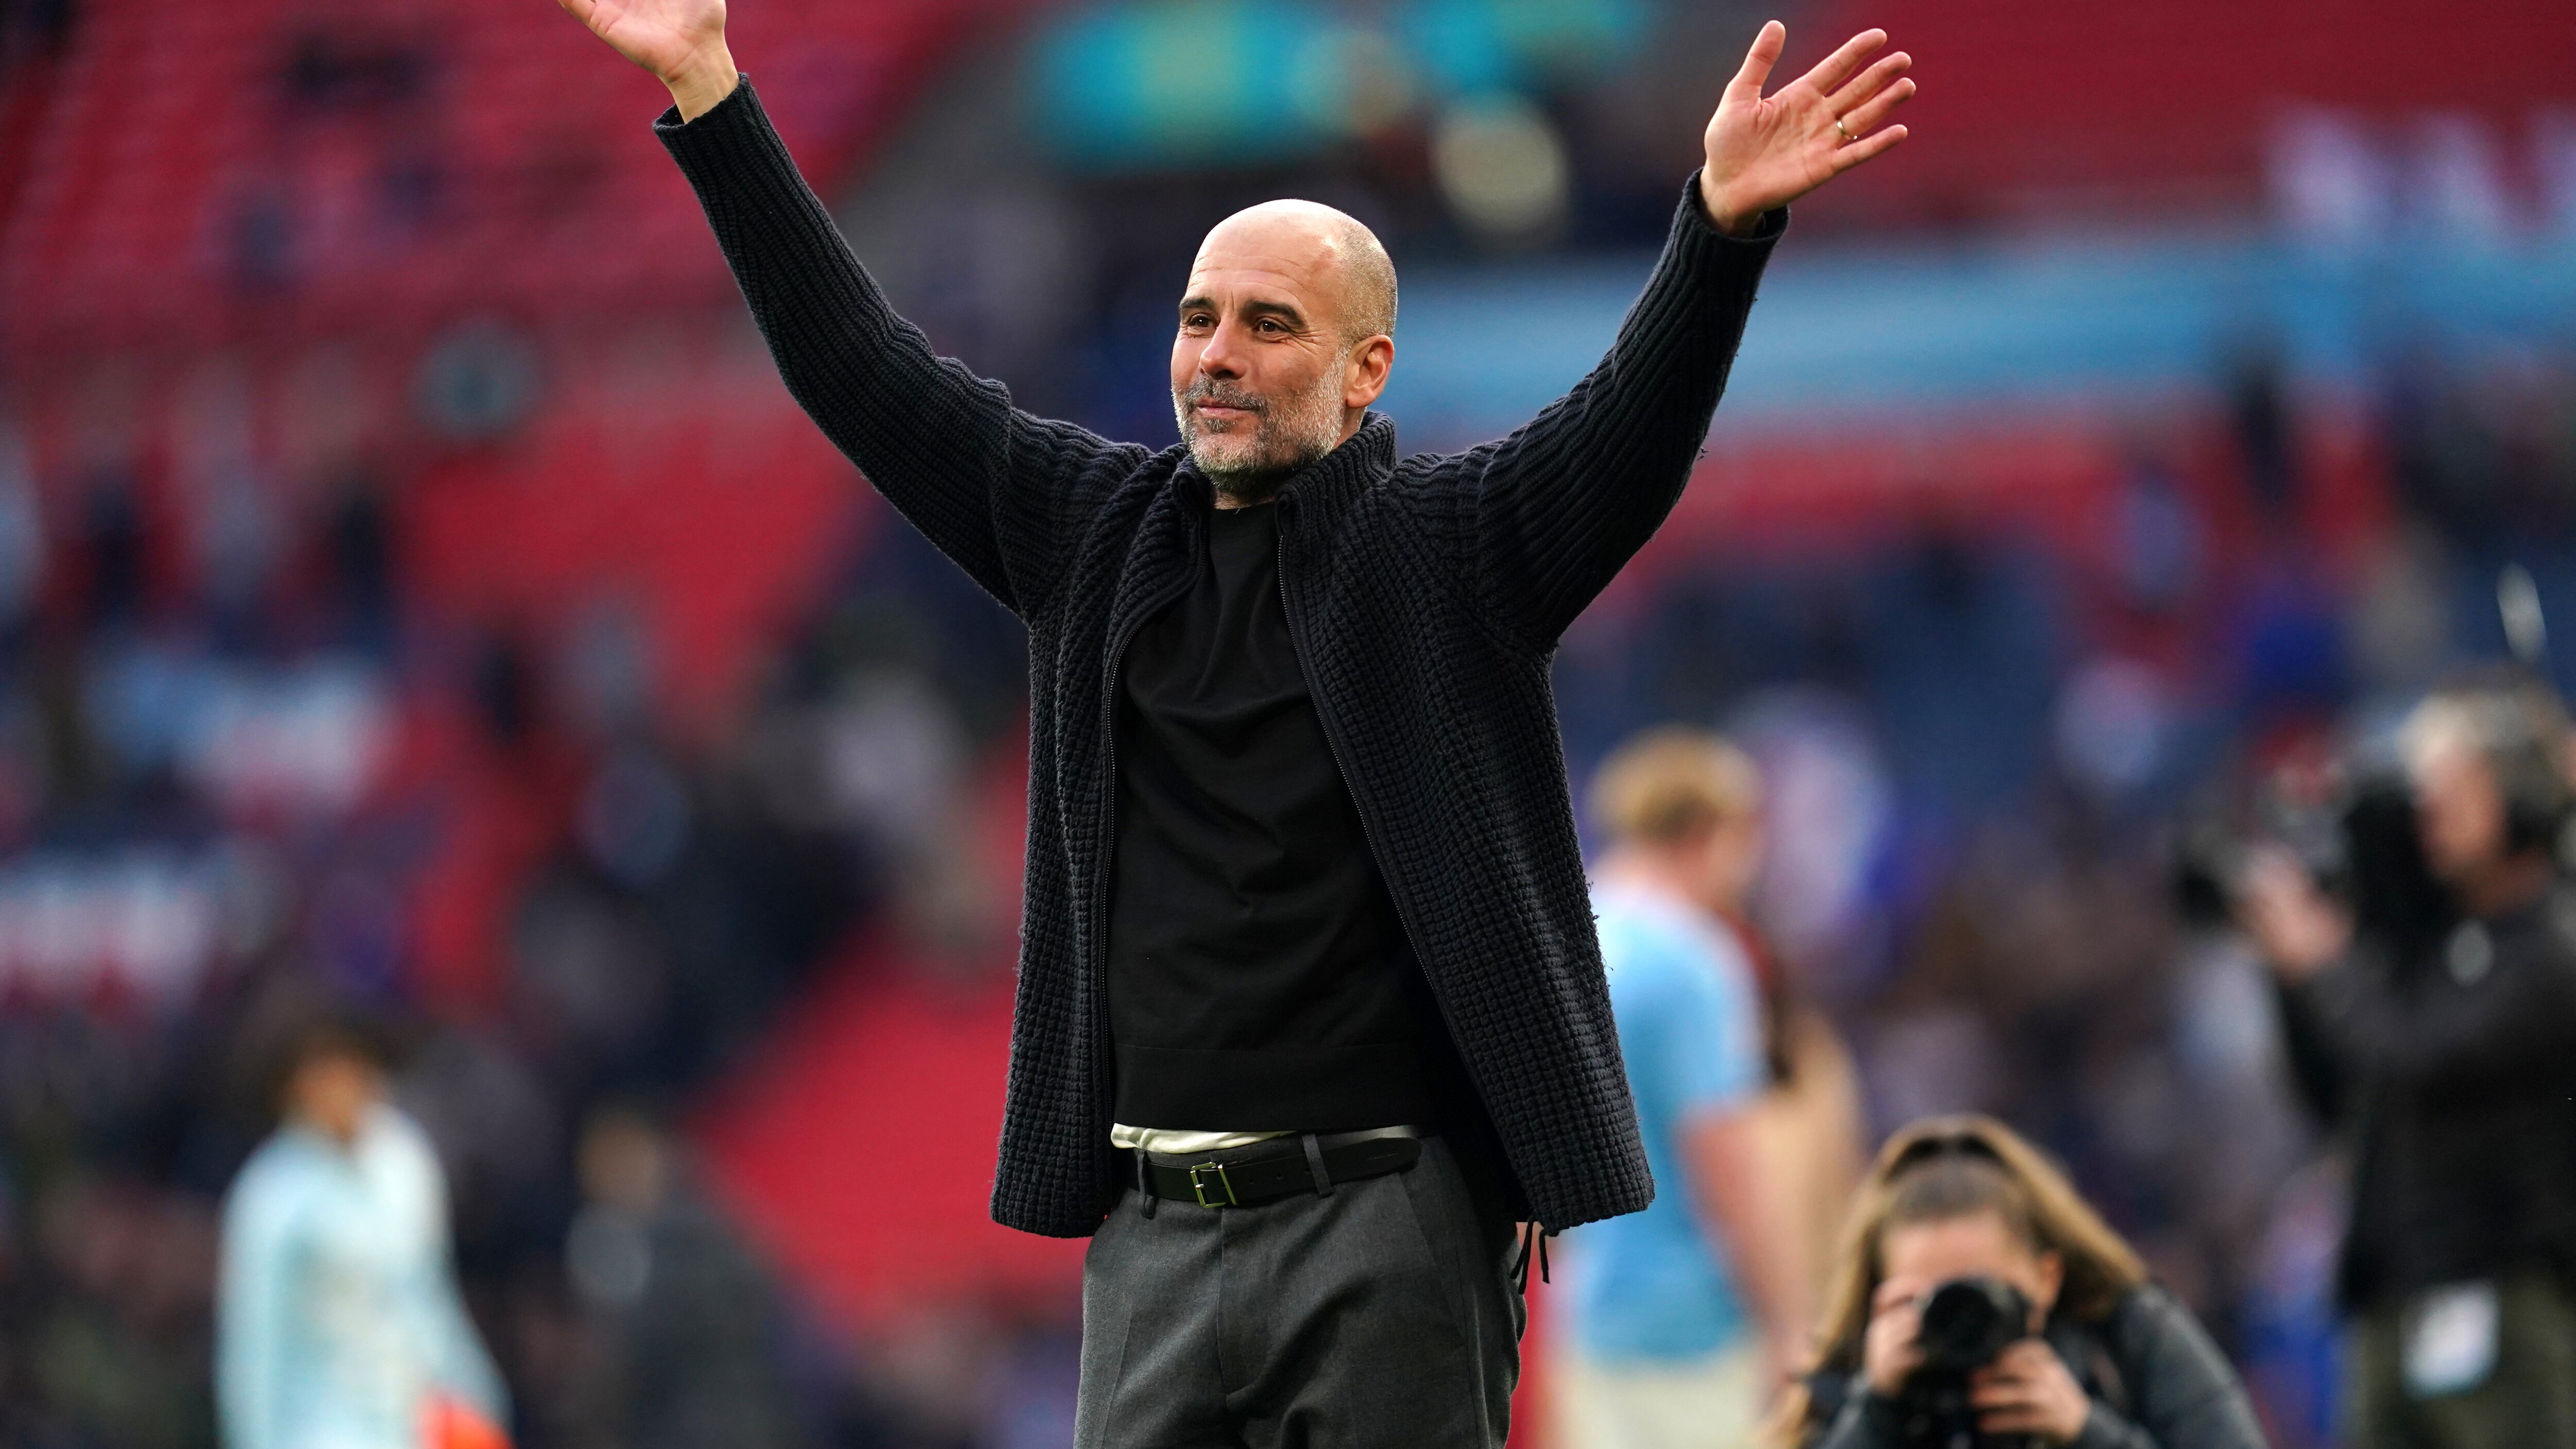 Pep Guardiola hopes his players can cool off ahead of their next game